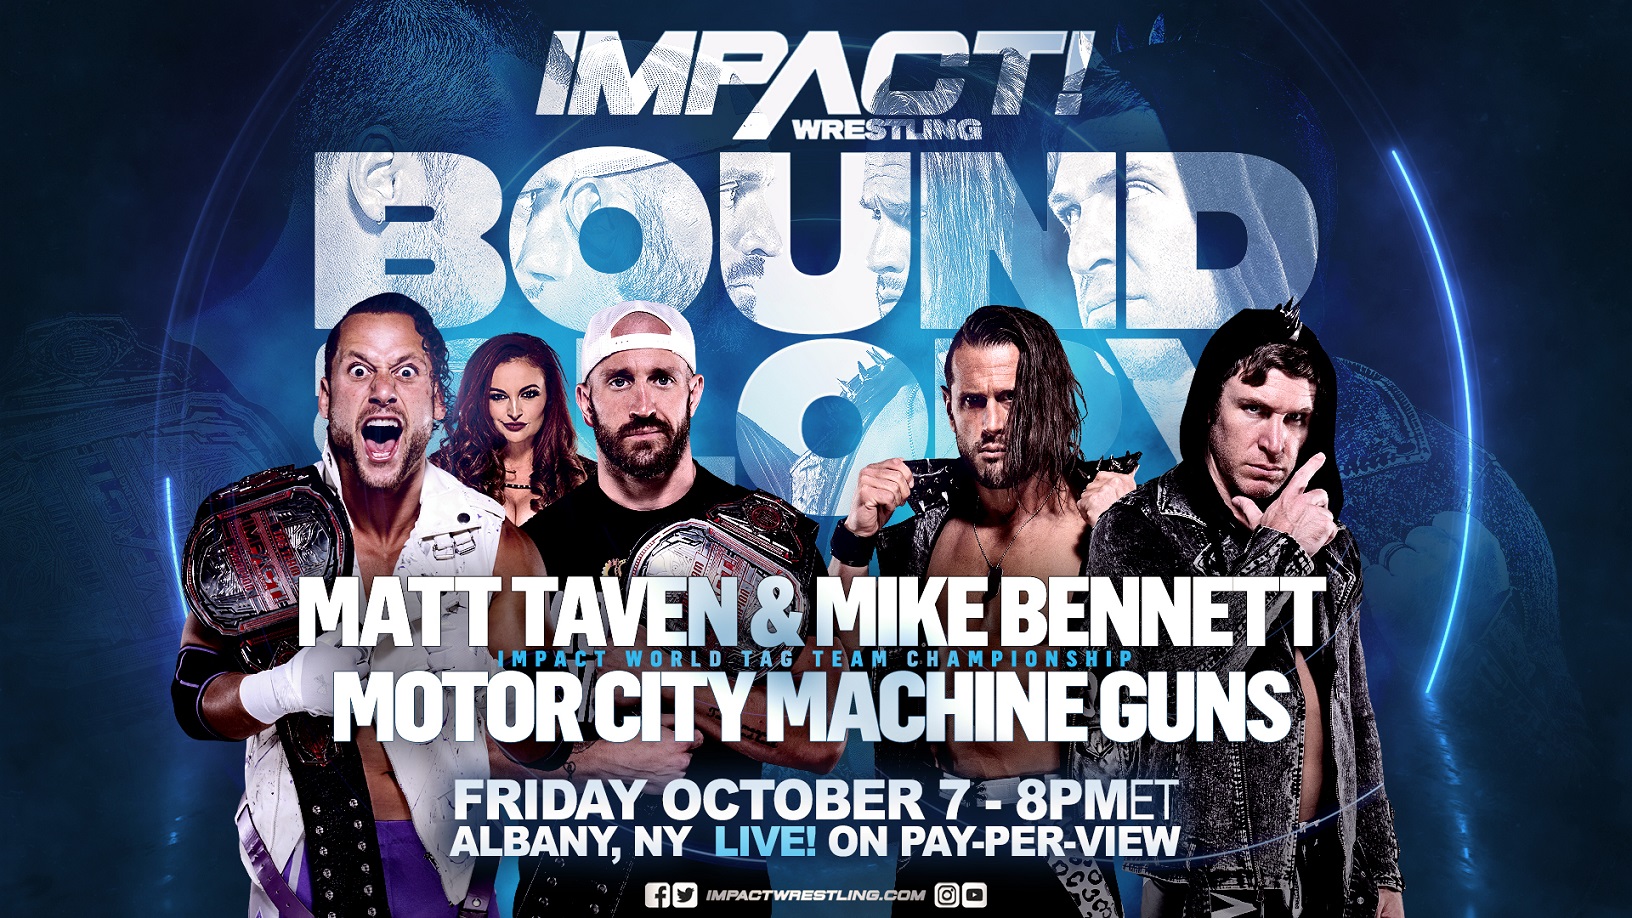 MCMG Earn IMPACT World Tag Team Title Shot vs Taven & Bennett at Bound For Glory, Must First Battle PCO & Vincent at Victory Road